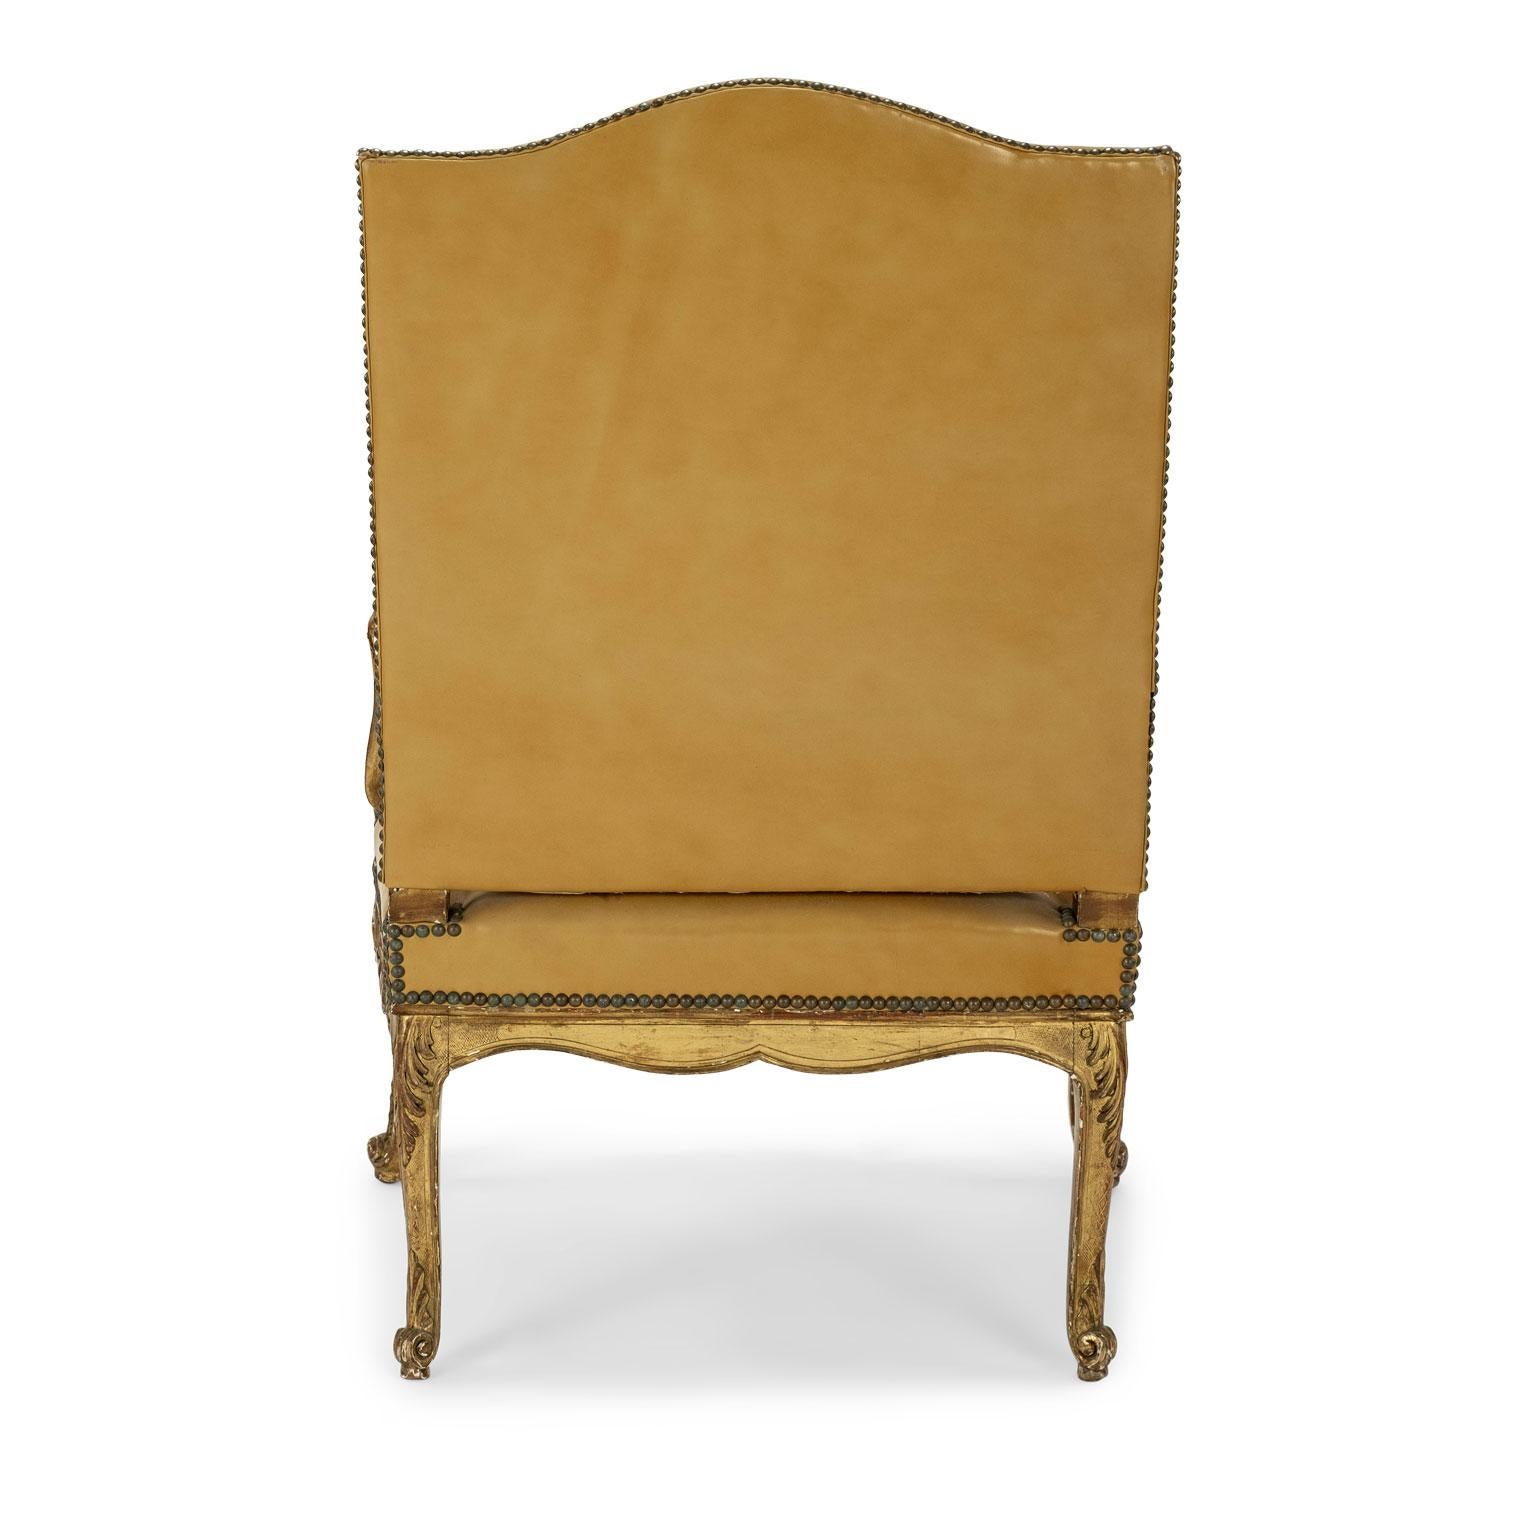 19th Century Regence Style Giltwood Armchair For Sale